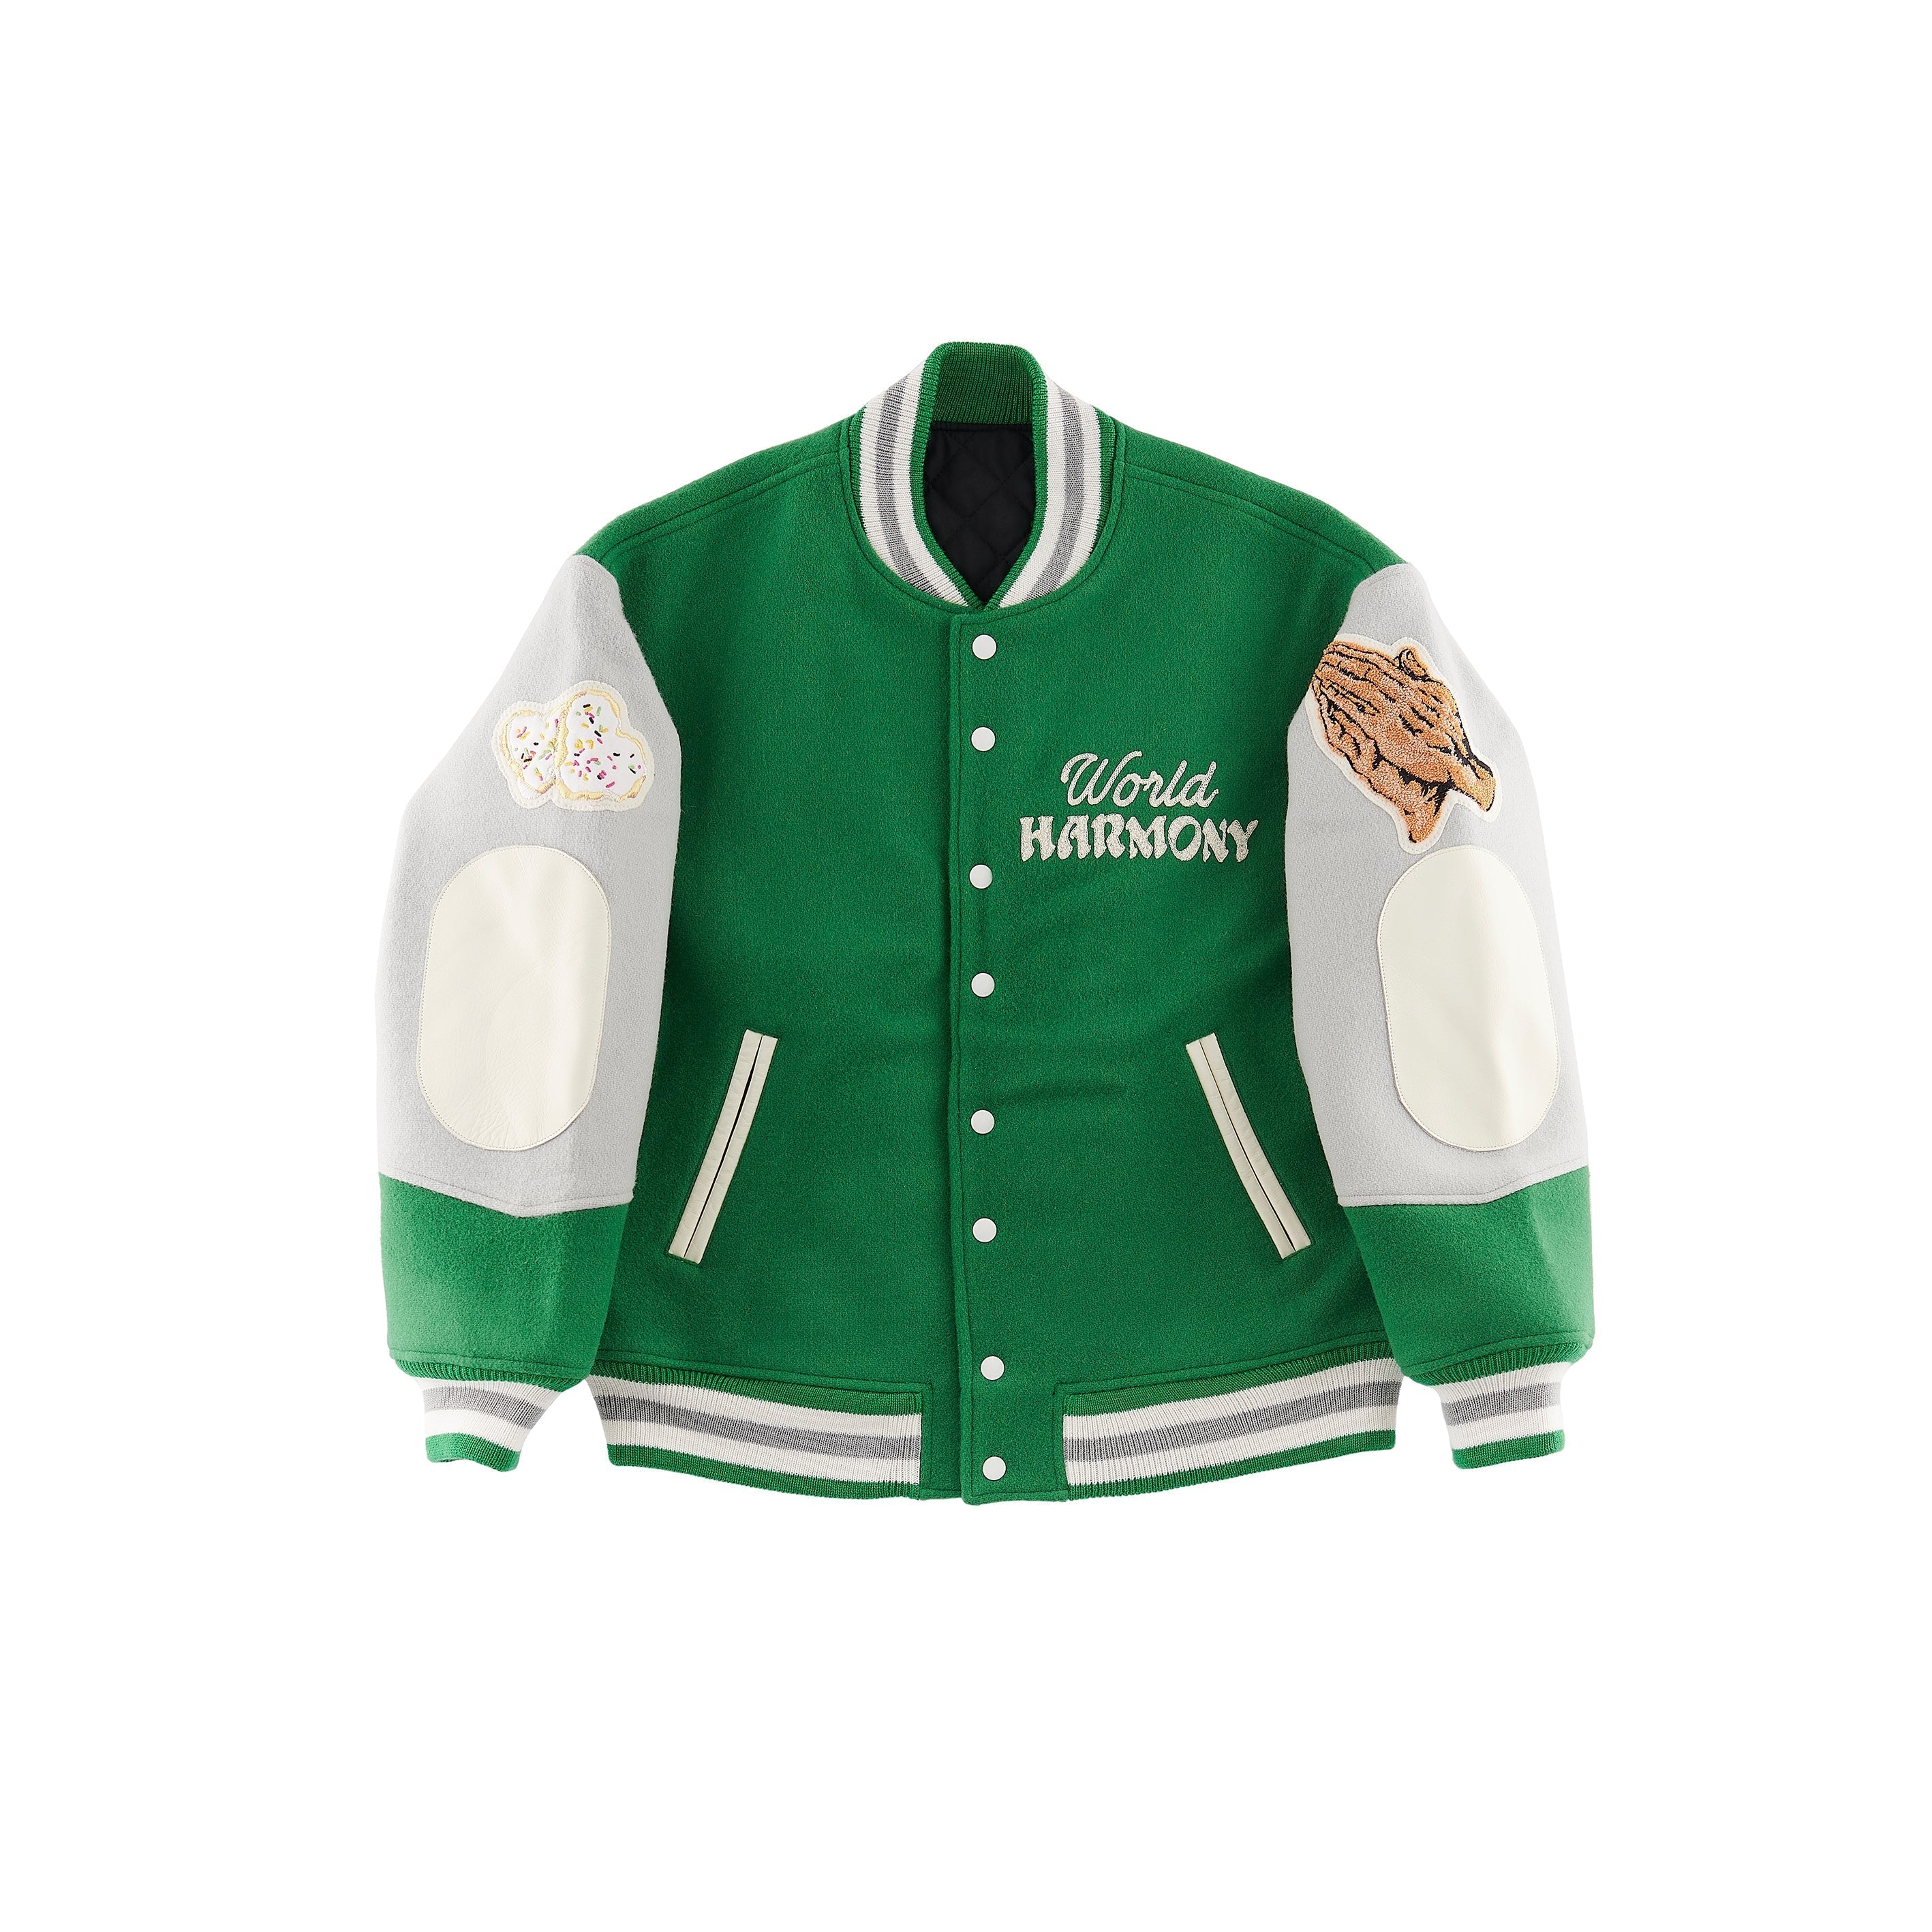 SHERMER ACADEMY VARSITY JACKET | Why are you here?